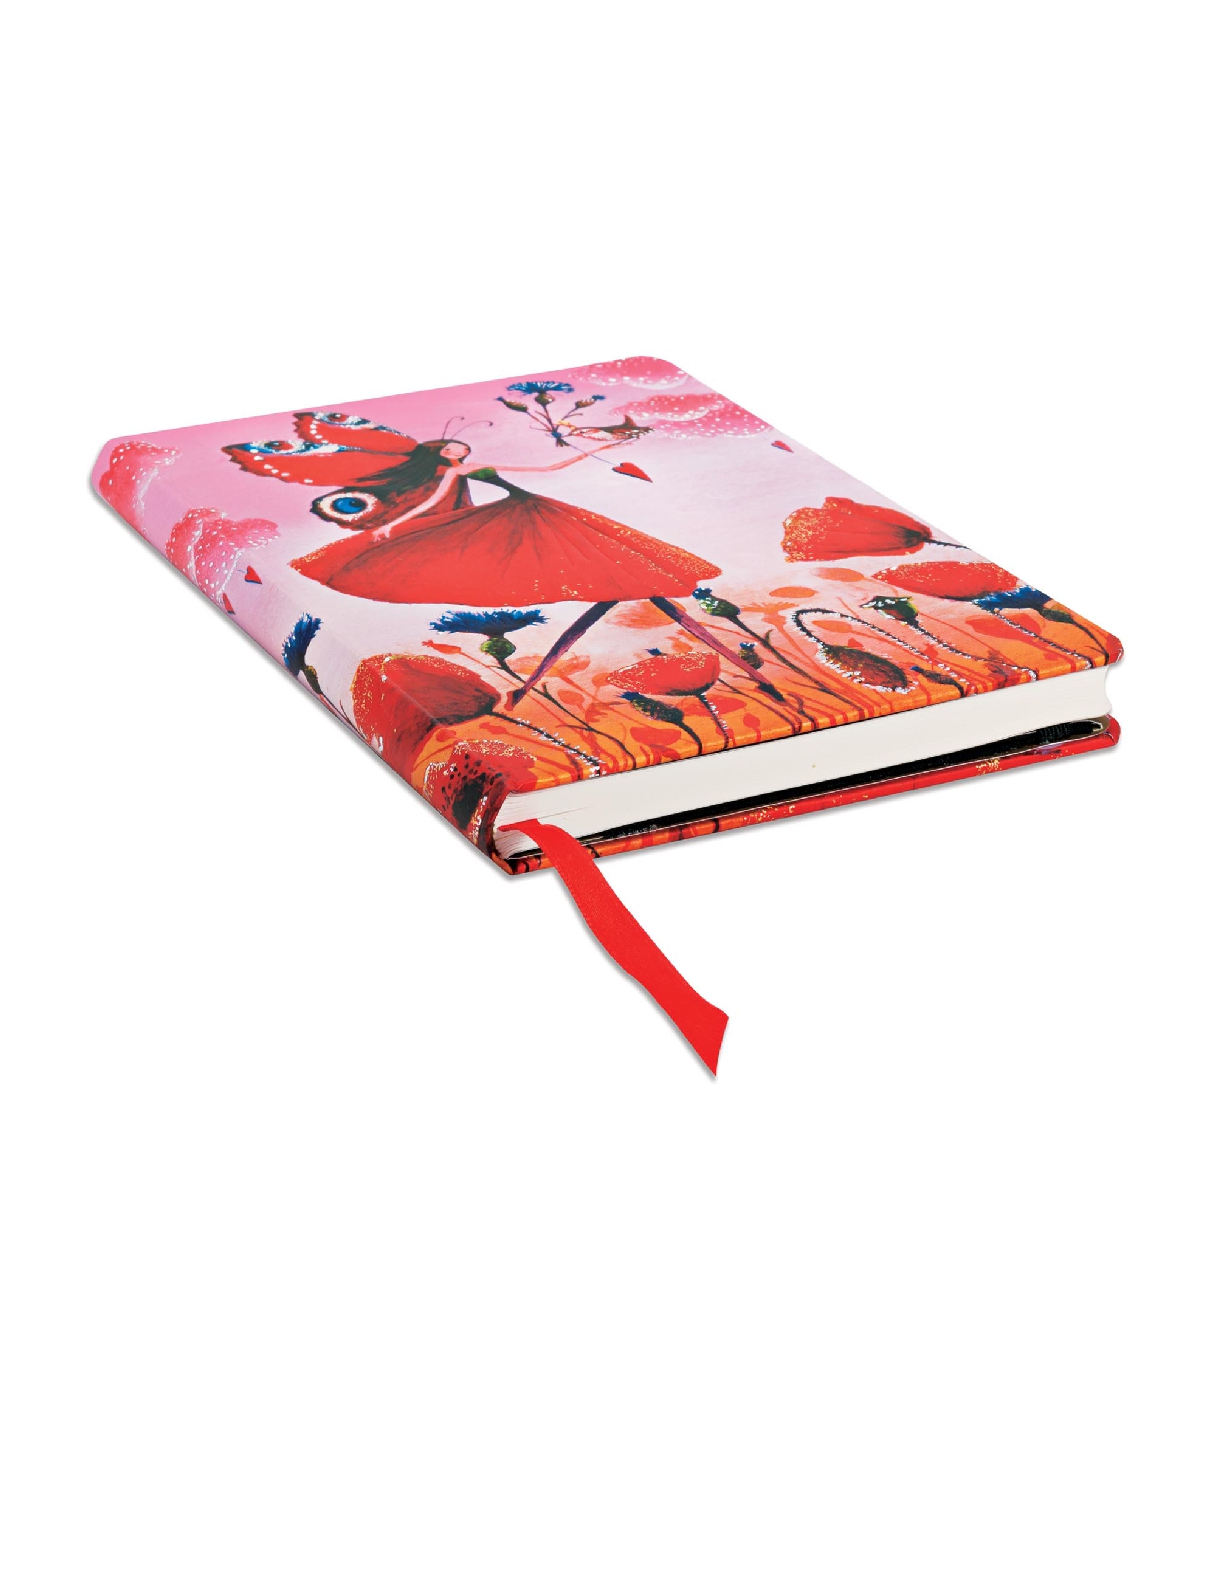 Poppy Field, Mila Marquis Collection, Hardcover, Midi, Lined, Elastic Band Closure, 176 Pg, 85 GSM